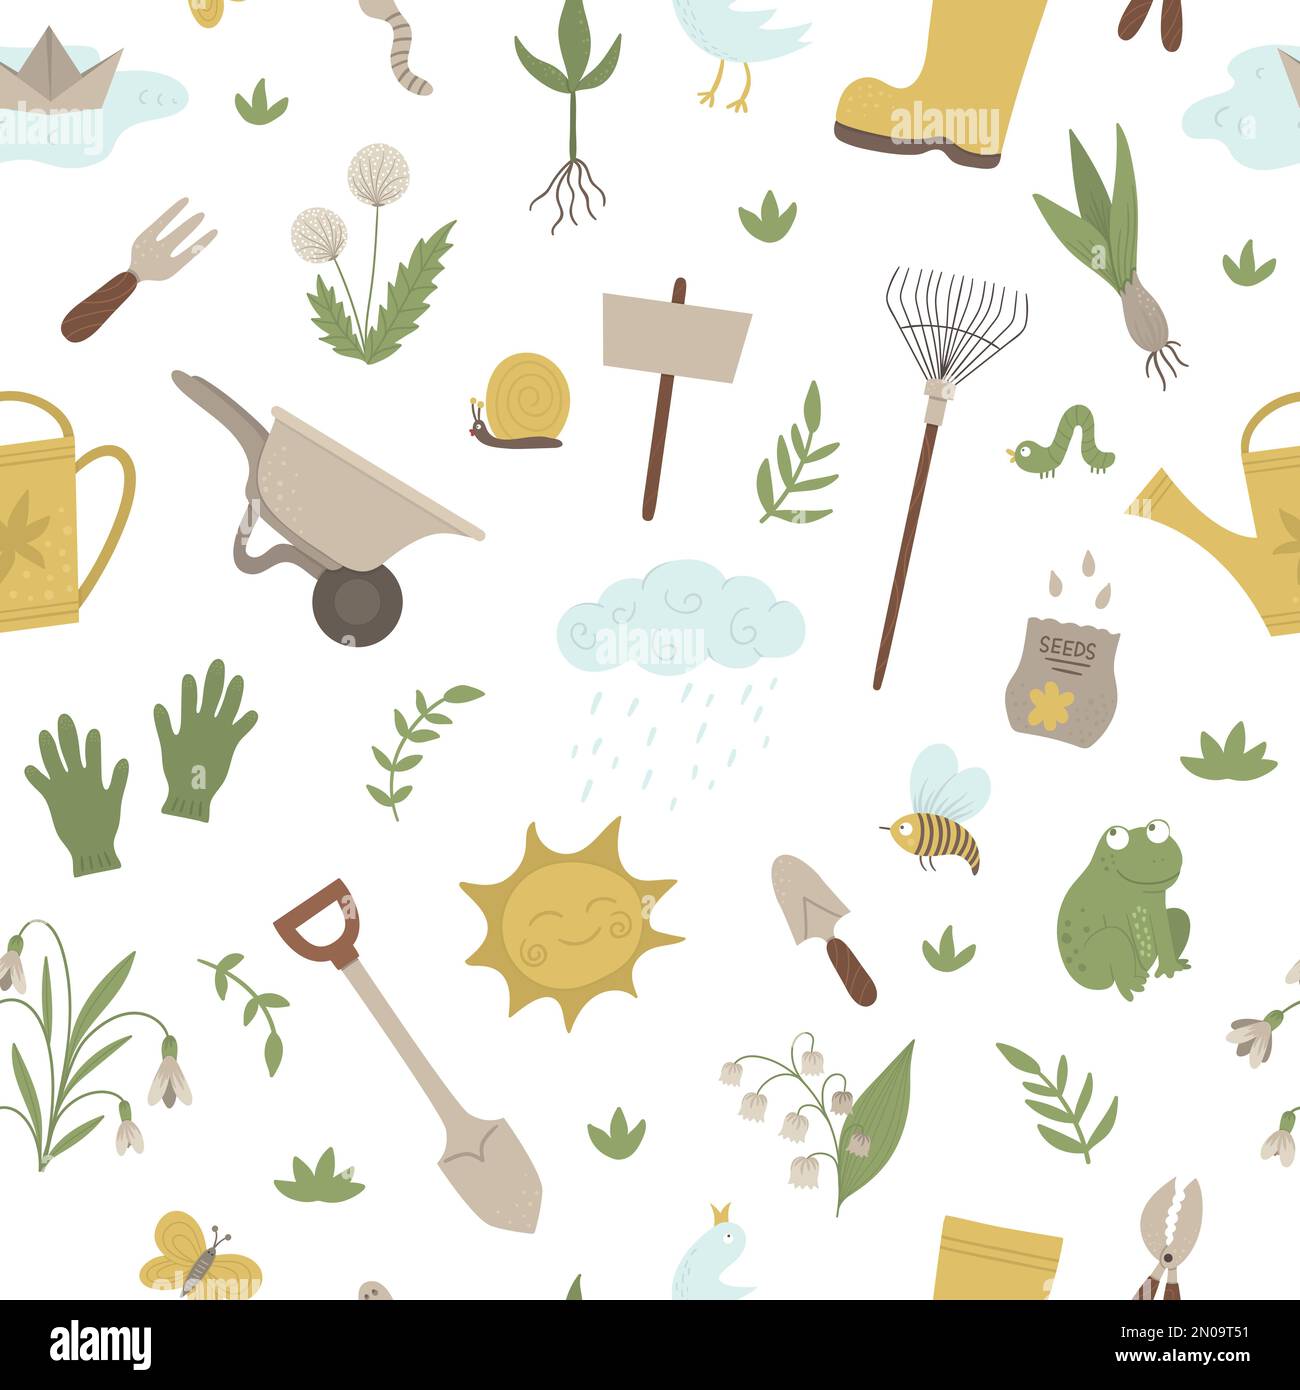 Vector seamless pattern with garden things, tools, flowers, herbs, plants. Repeat background with gardening equipment. Flat spring texture. Stock Vector